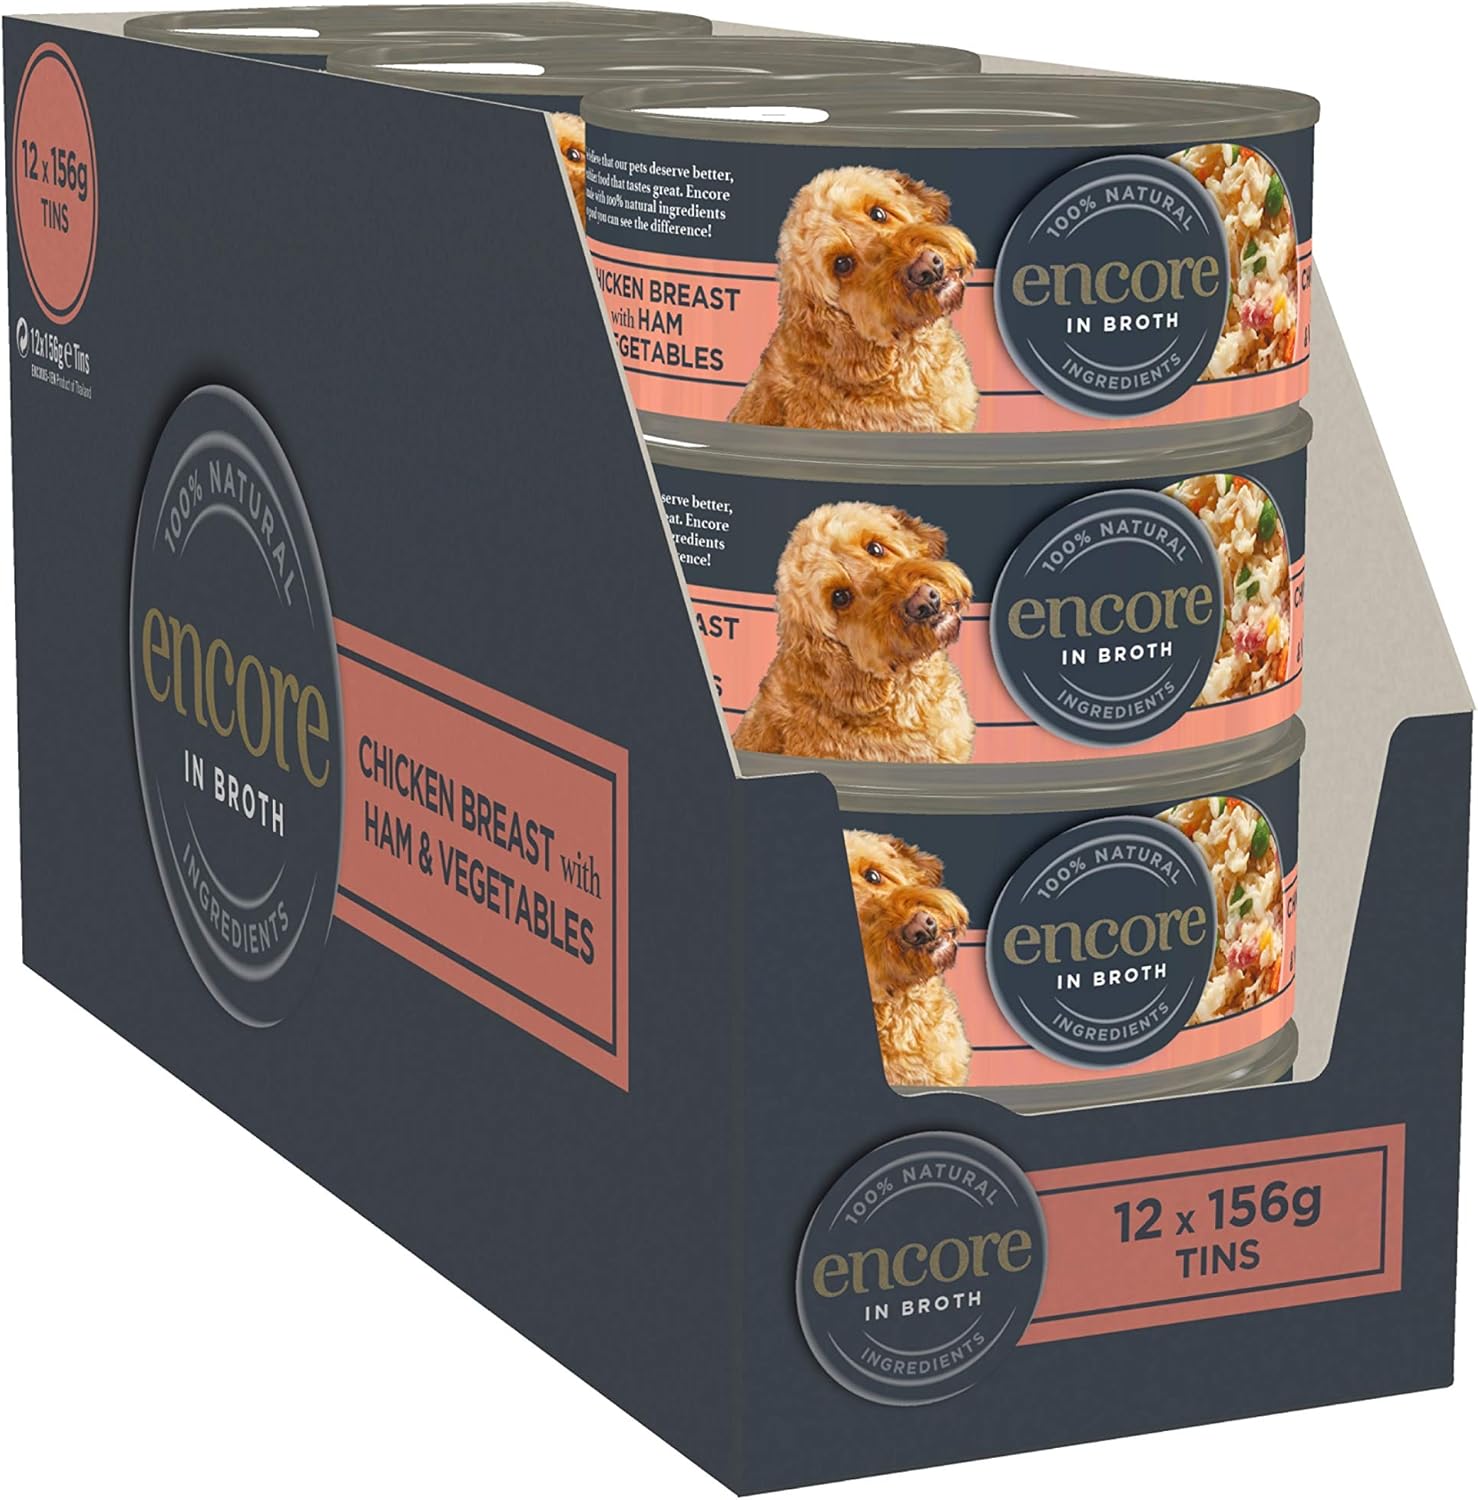 Encore 100% Natural Wet Dog Food, Chicken Breast with Ham and Vegetables in 156g Tin (Pack of 12)?ENC5004